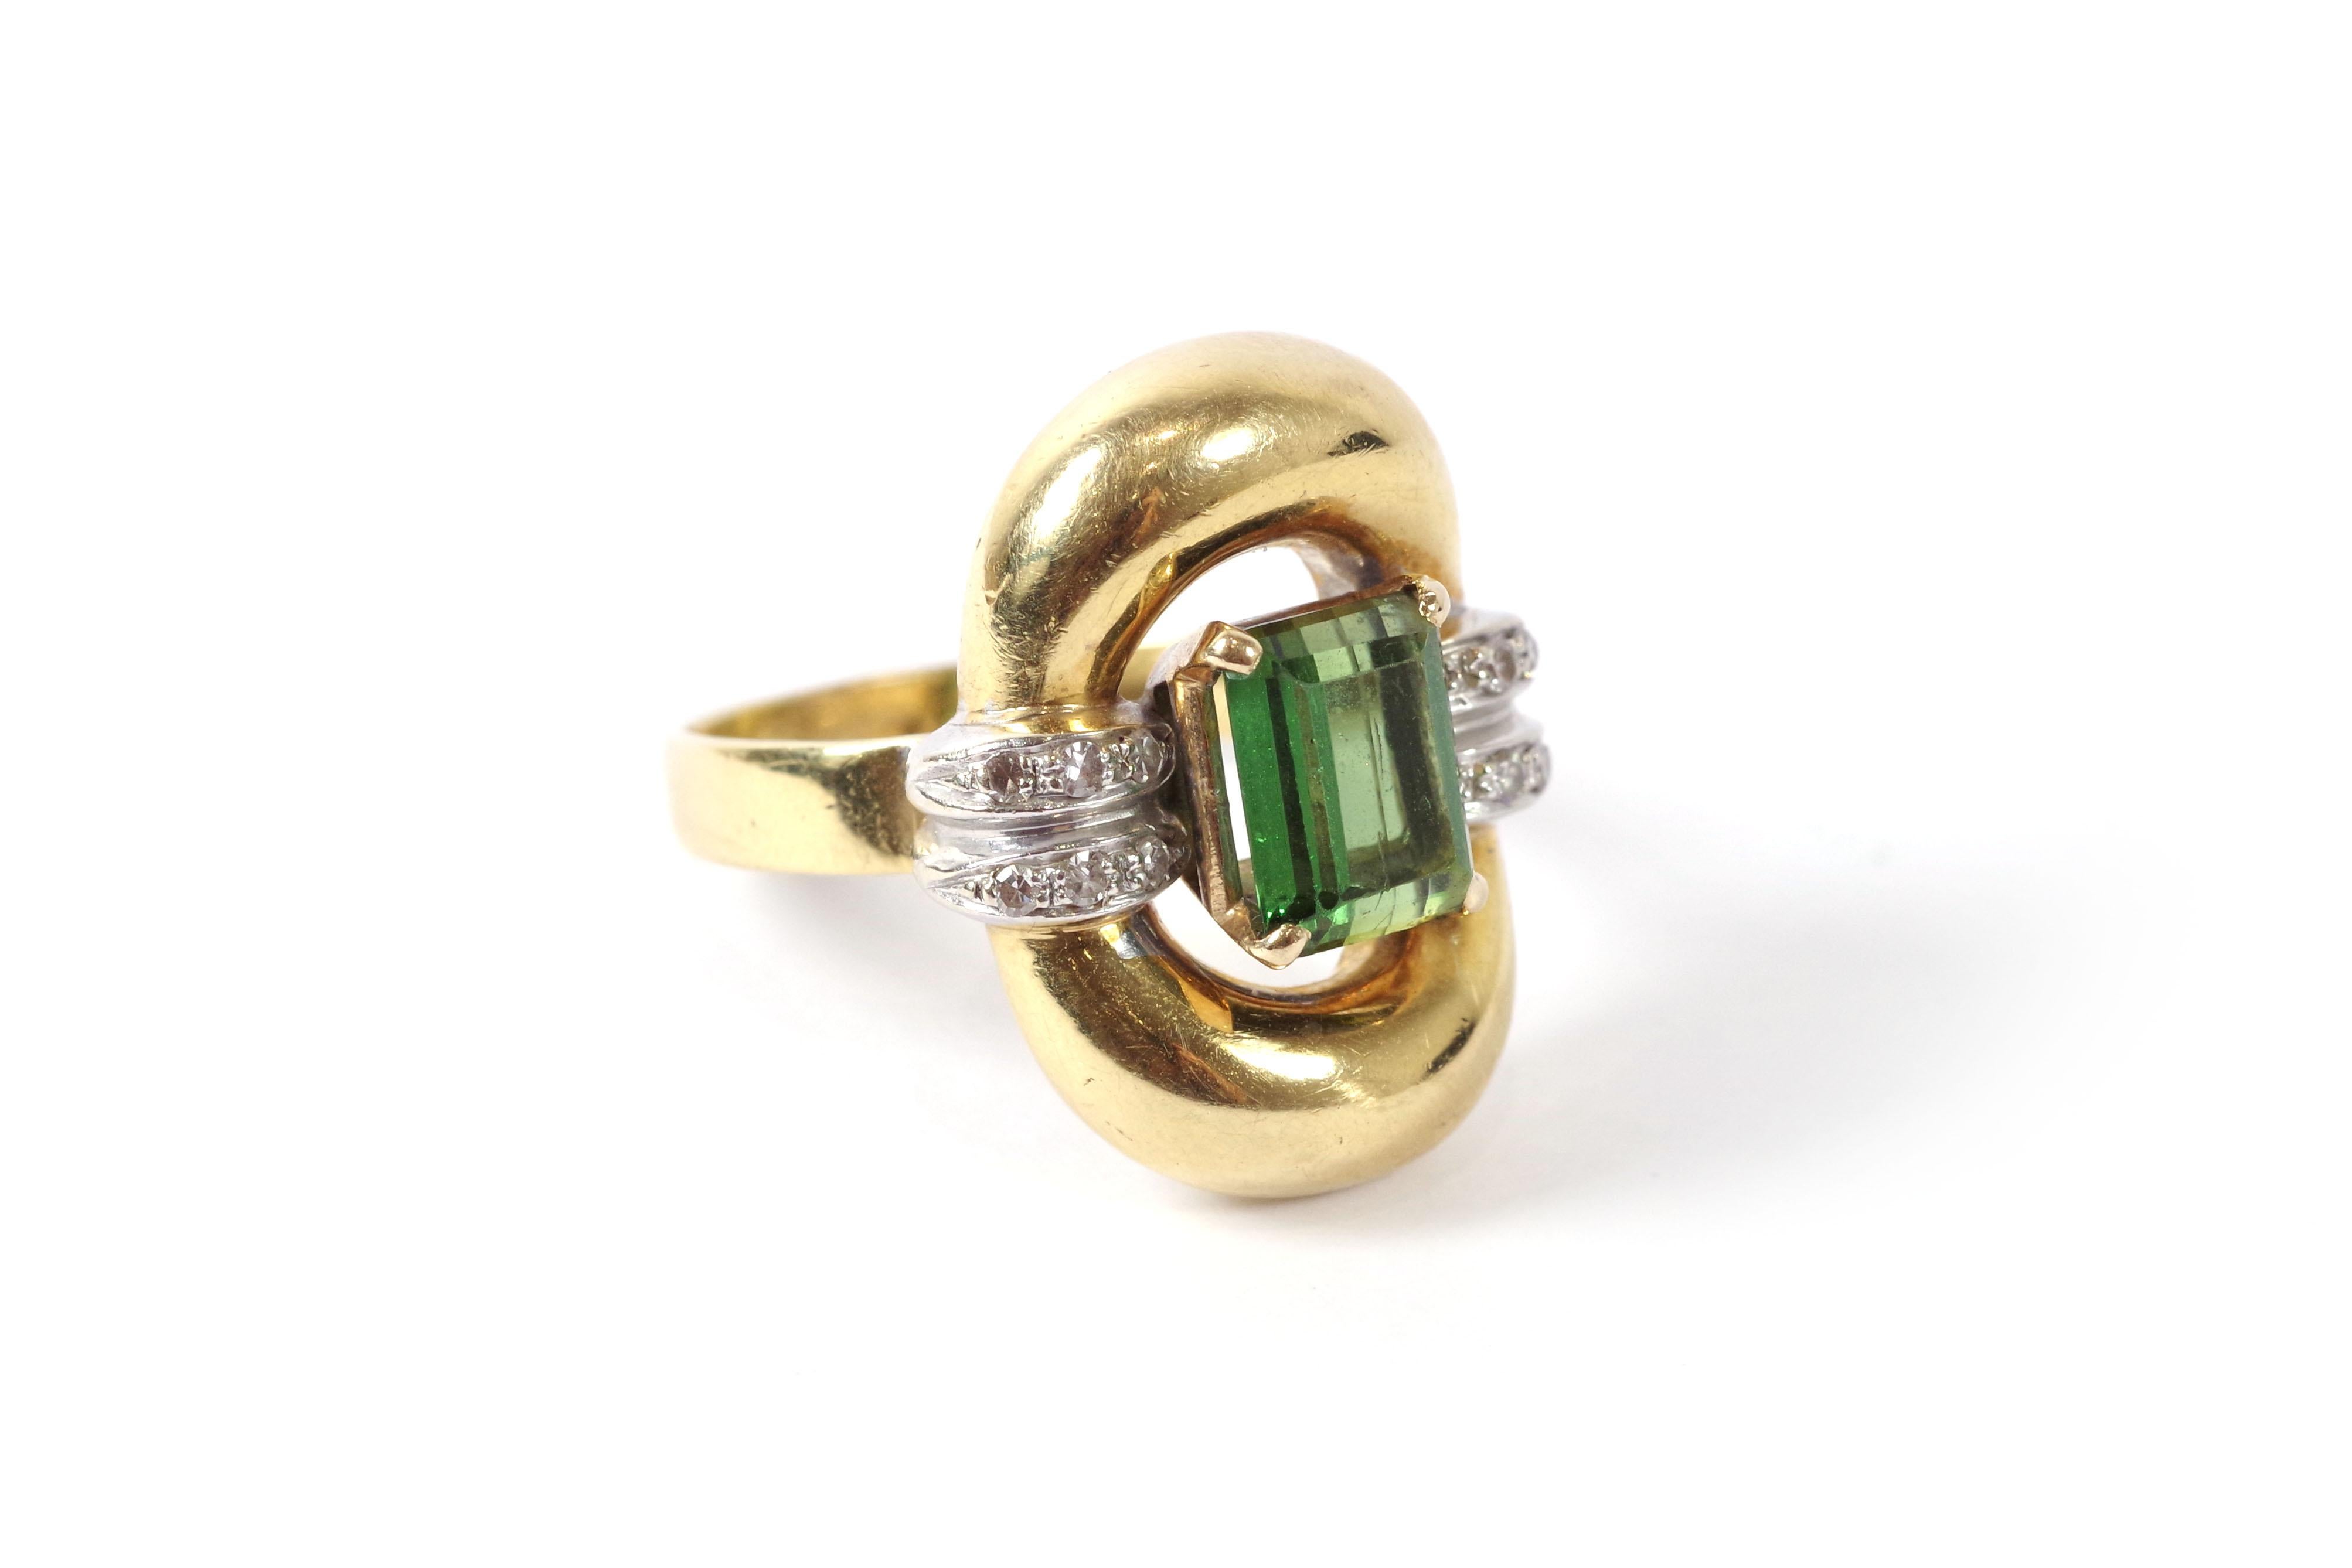 Retro tourmaline gold ring in 18 karat yellow gold. Vintage ring with an oval and domed top centered with a green tourmaline, also known as verdellite, set with four prongs. The ring's shoulders are adorned with two rows of platinum set with twelve